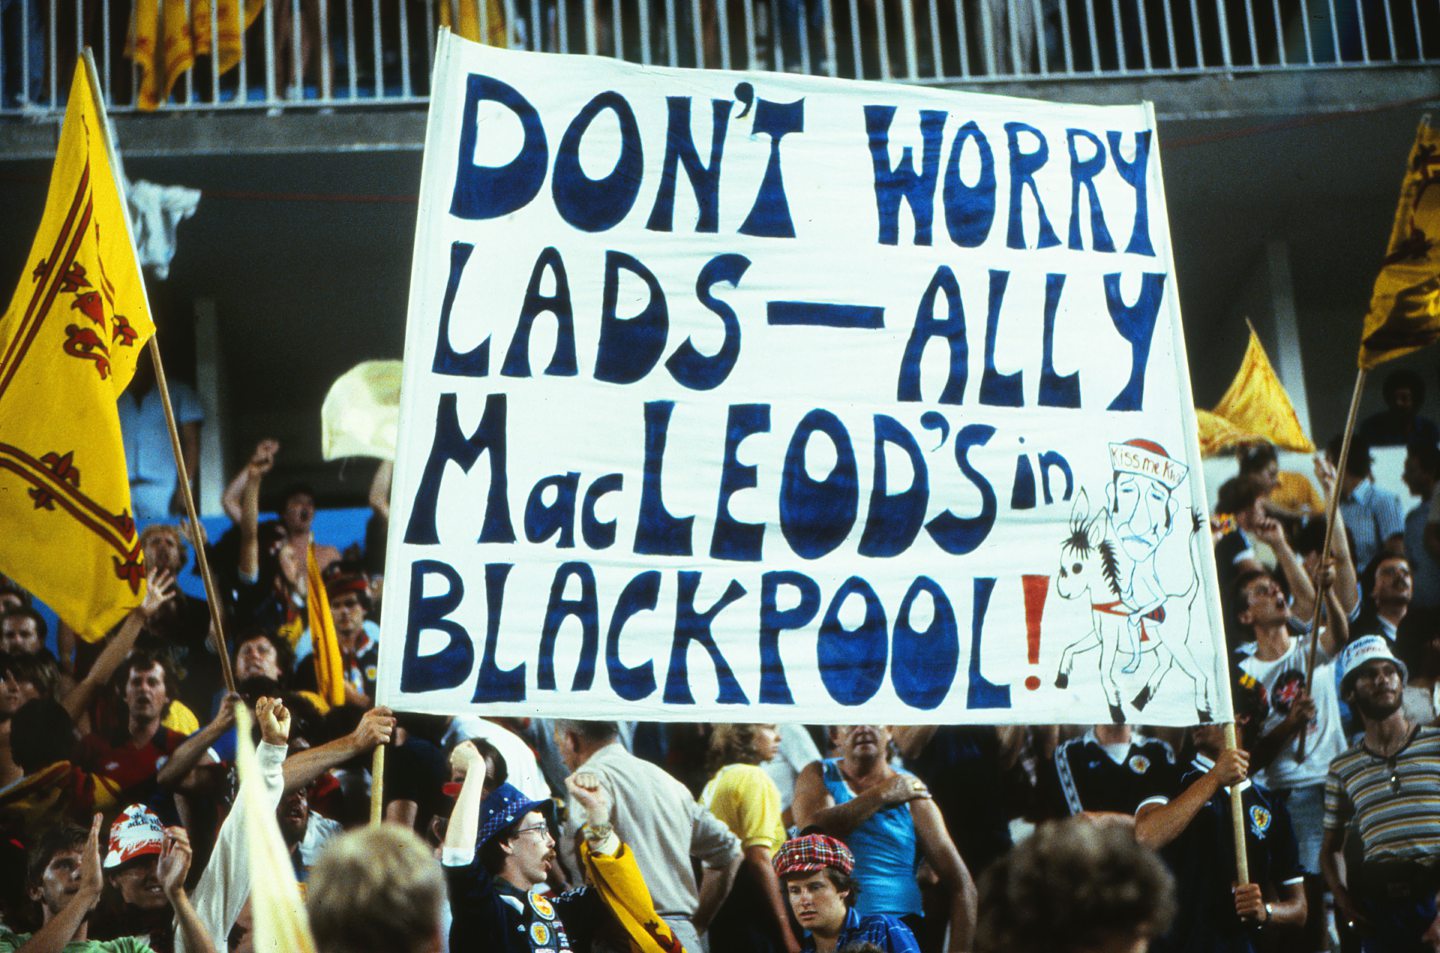 The Tartan Army holding a sign reading "Don't worry lads - Ally Macleod's in Blackpool" at the 1982 World Cup in Spain